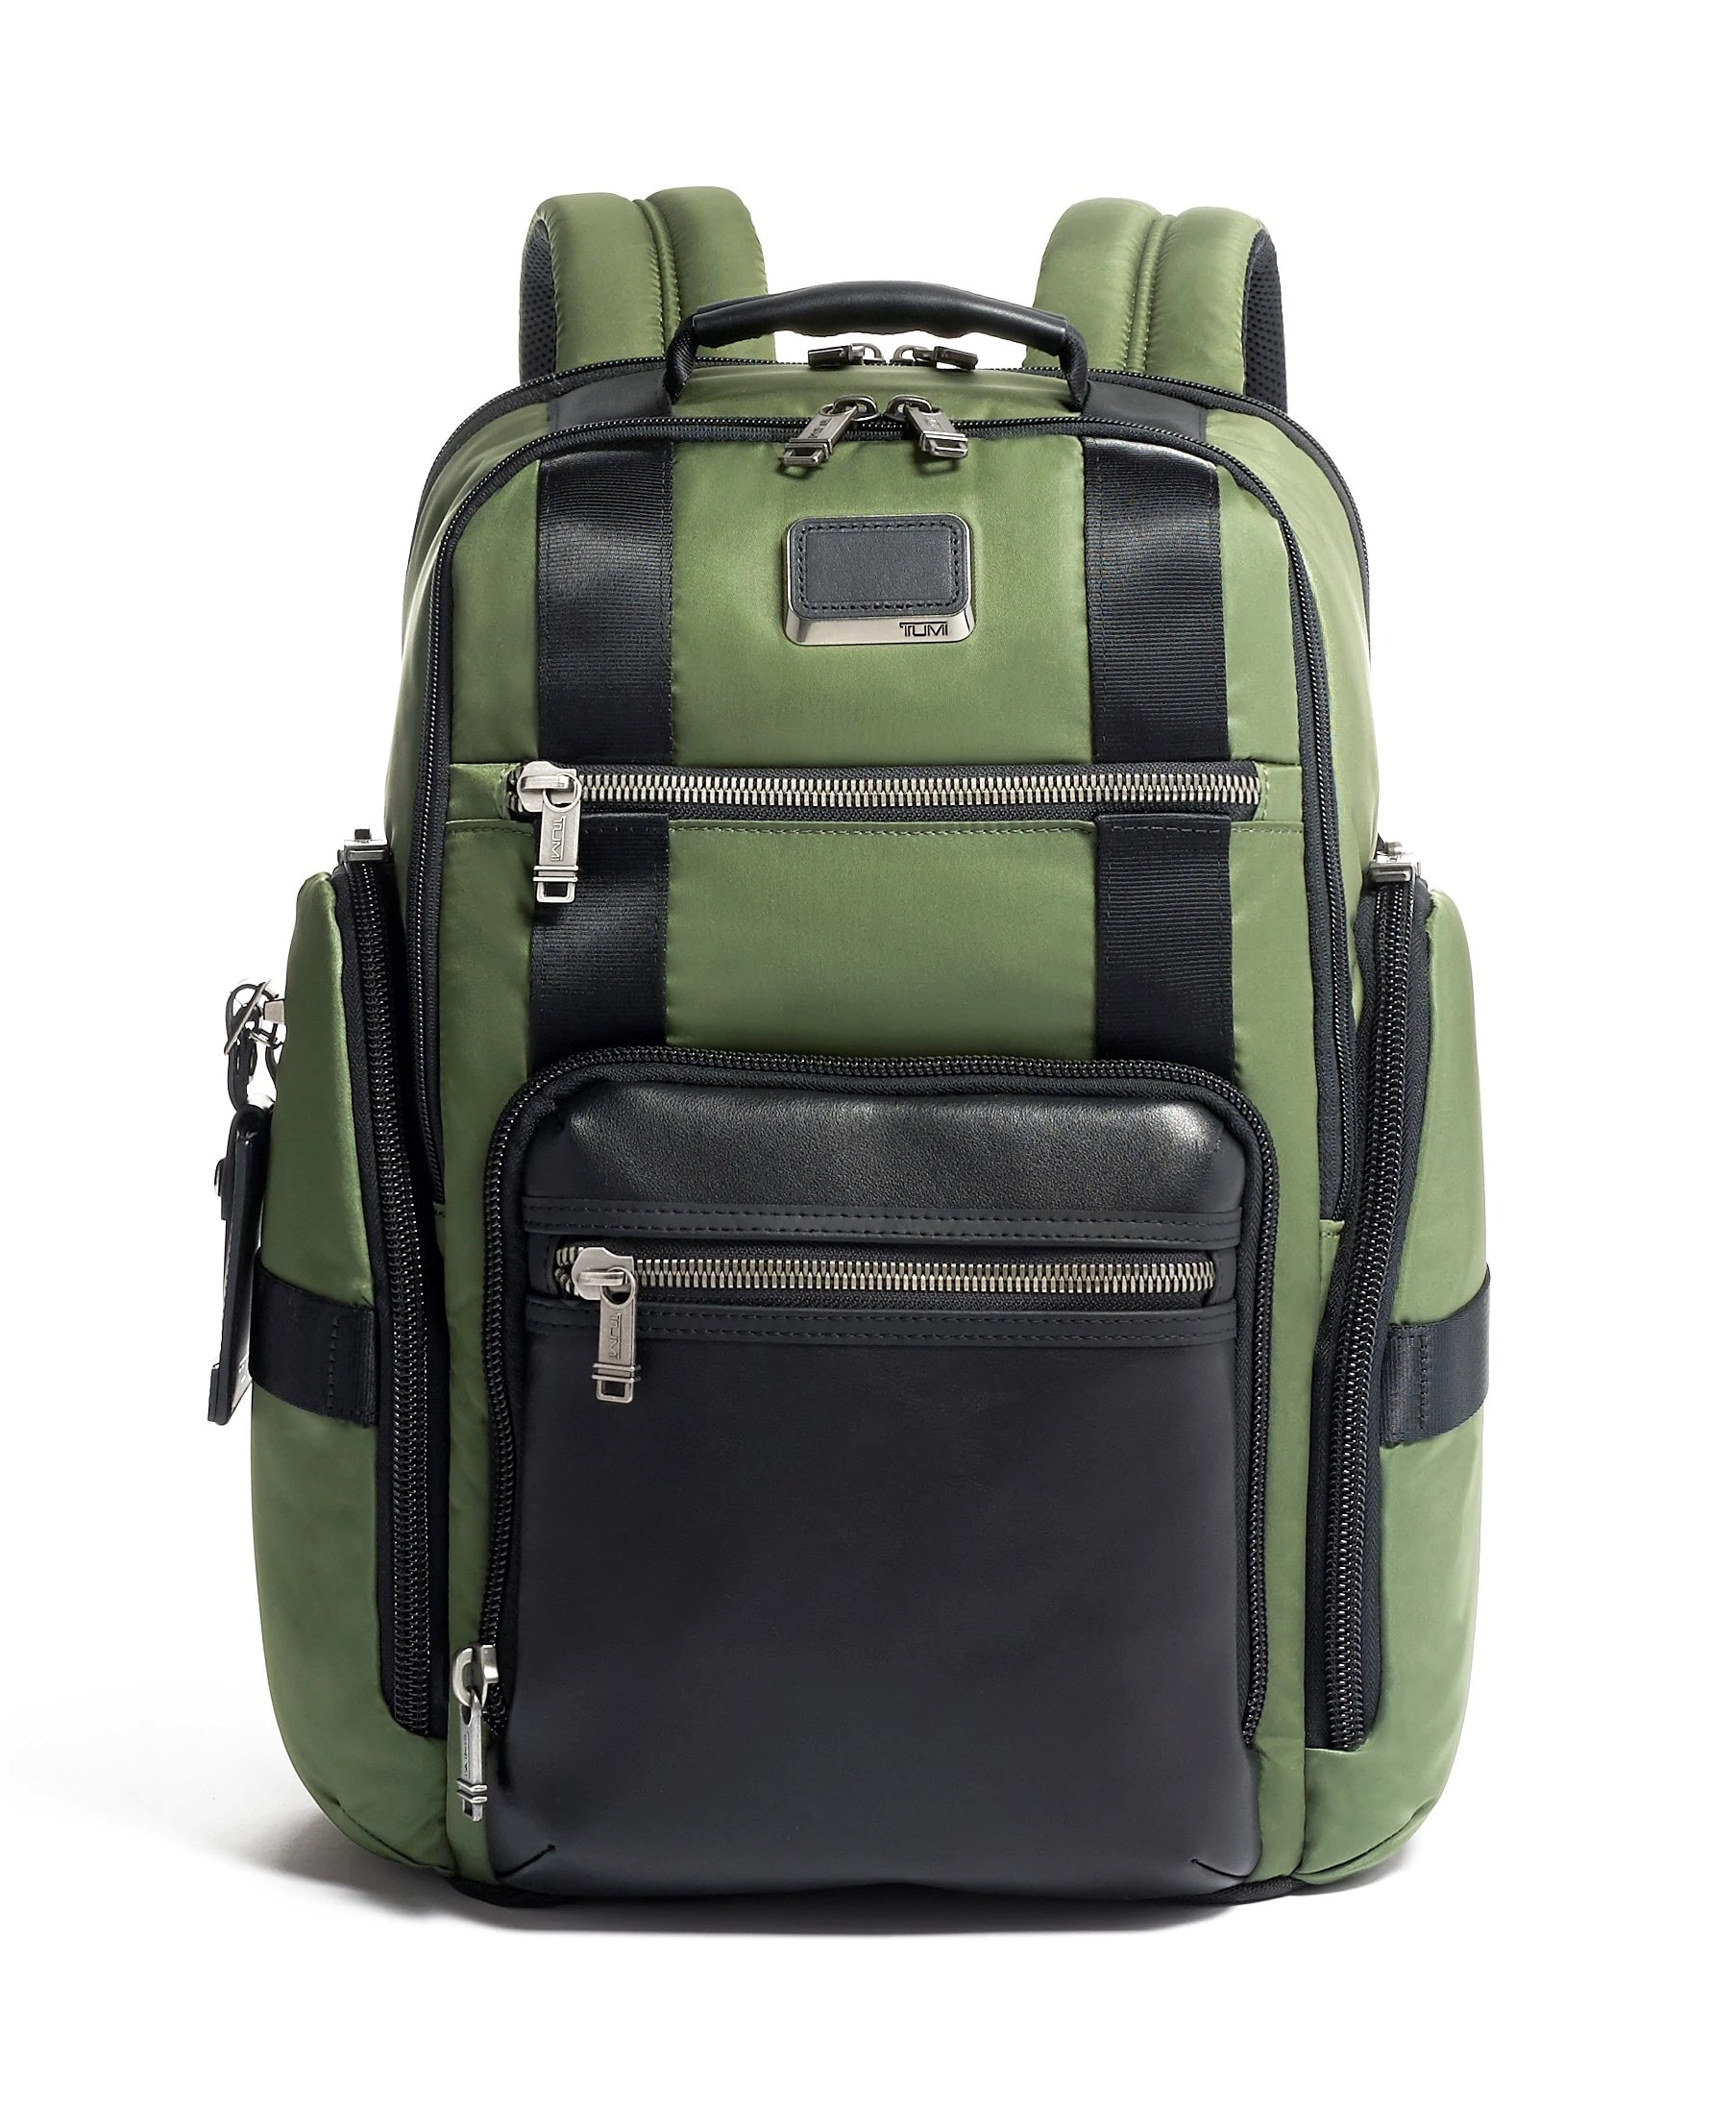 BALO NAM TUMI SHEPPARD DELUXE BRIEF PACK ALPHA BRAVO BACKPACK NEW 20